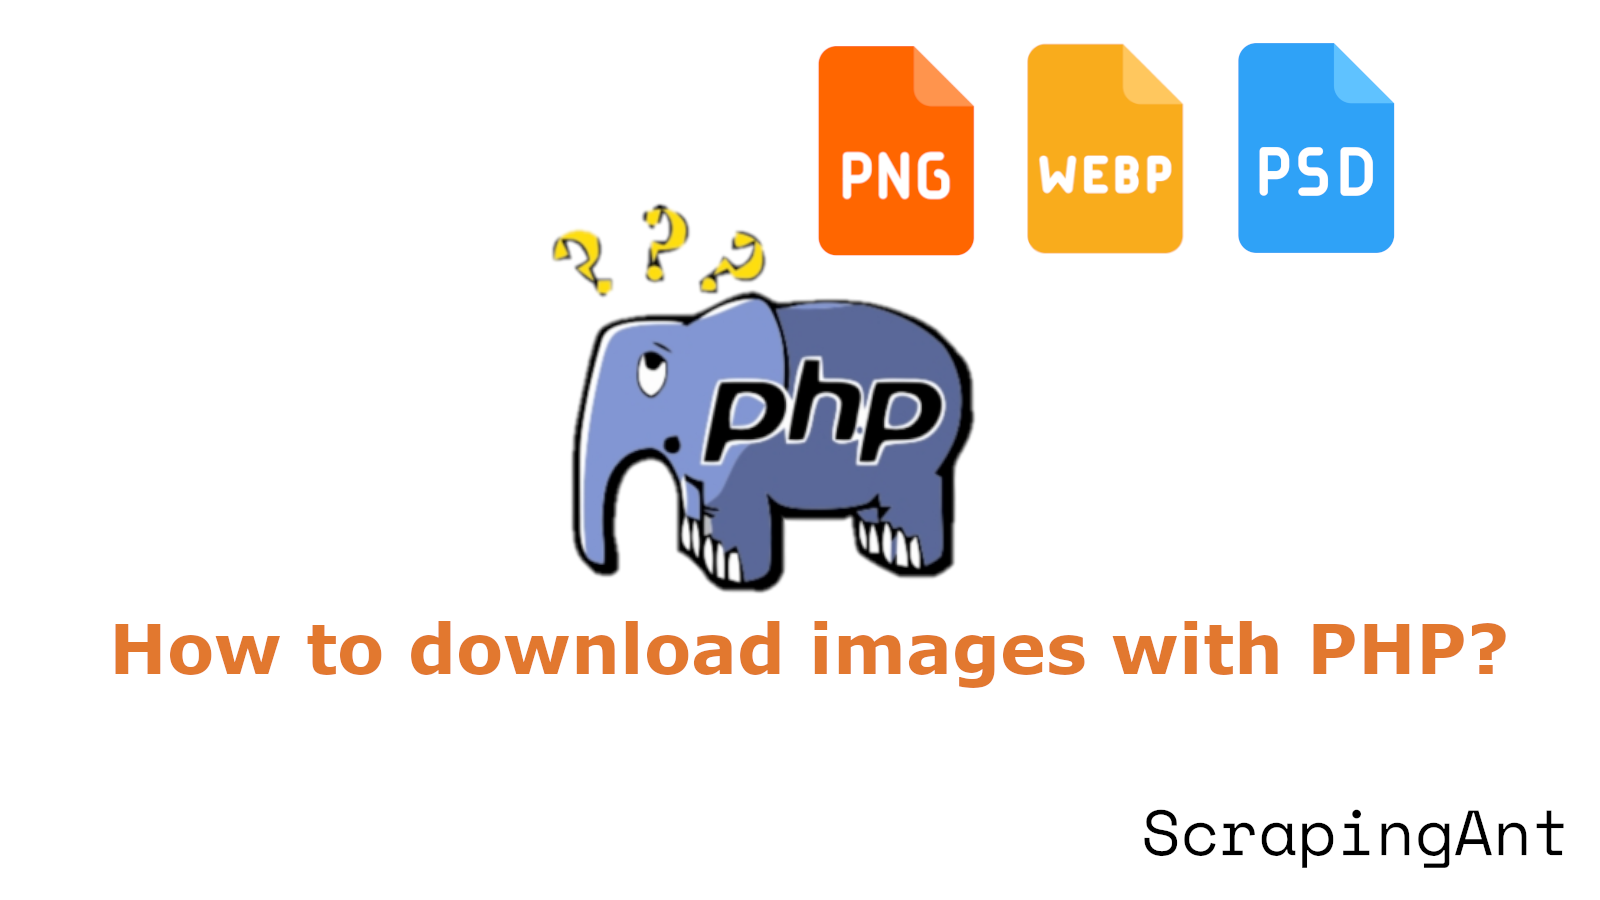 How to download images with PHP?